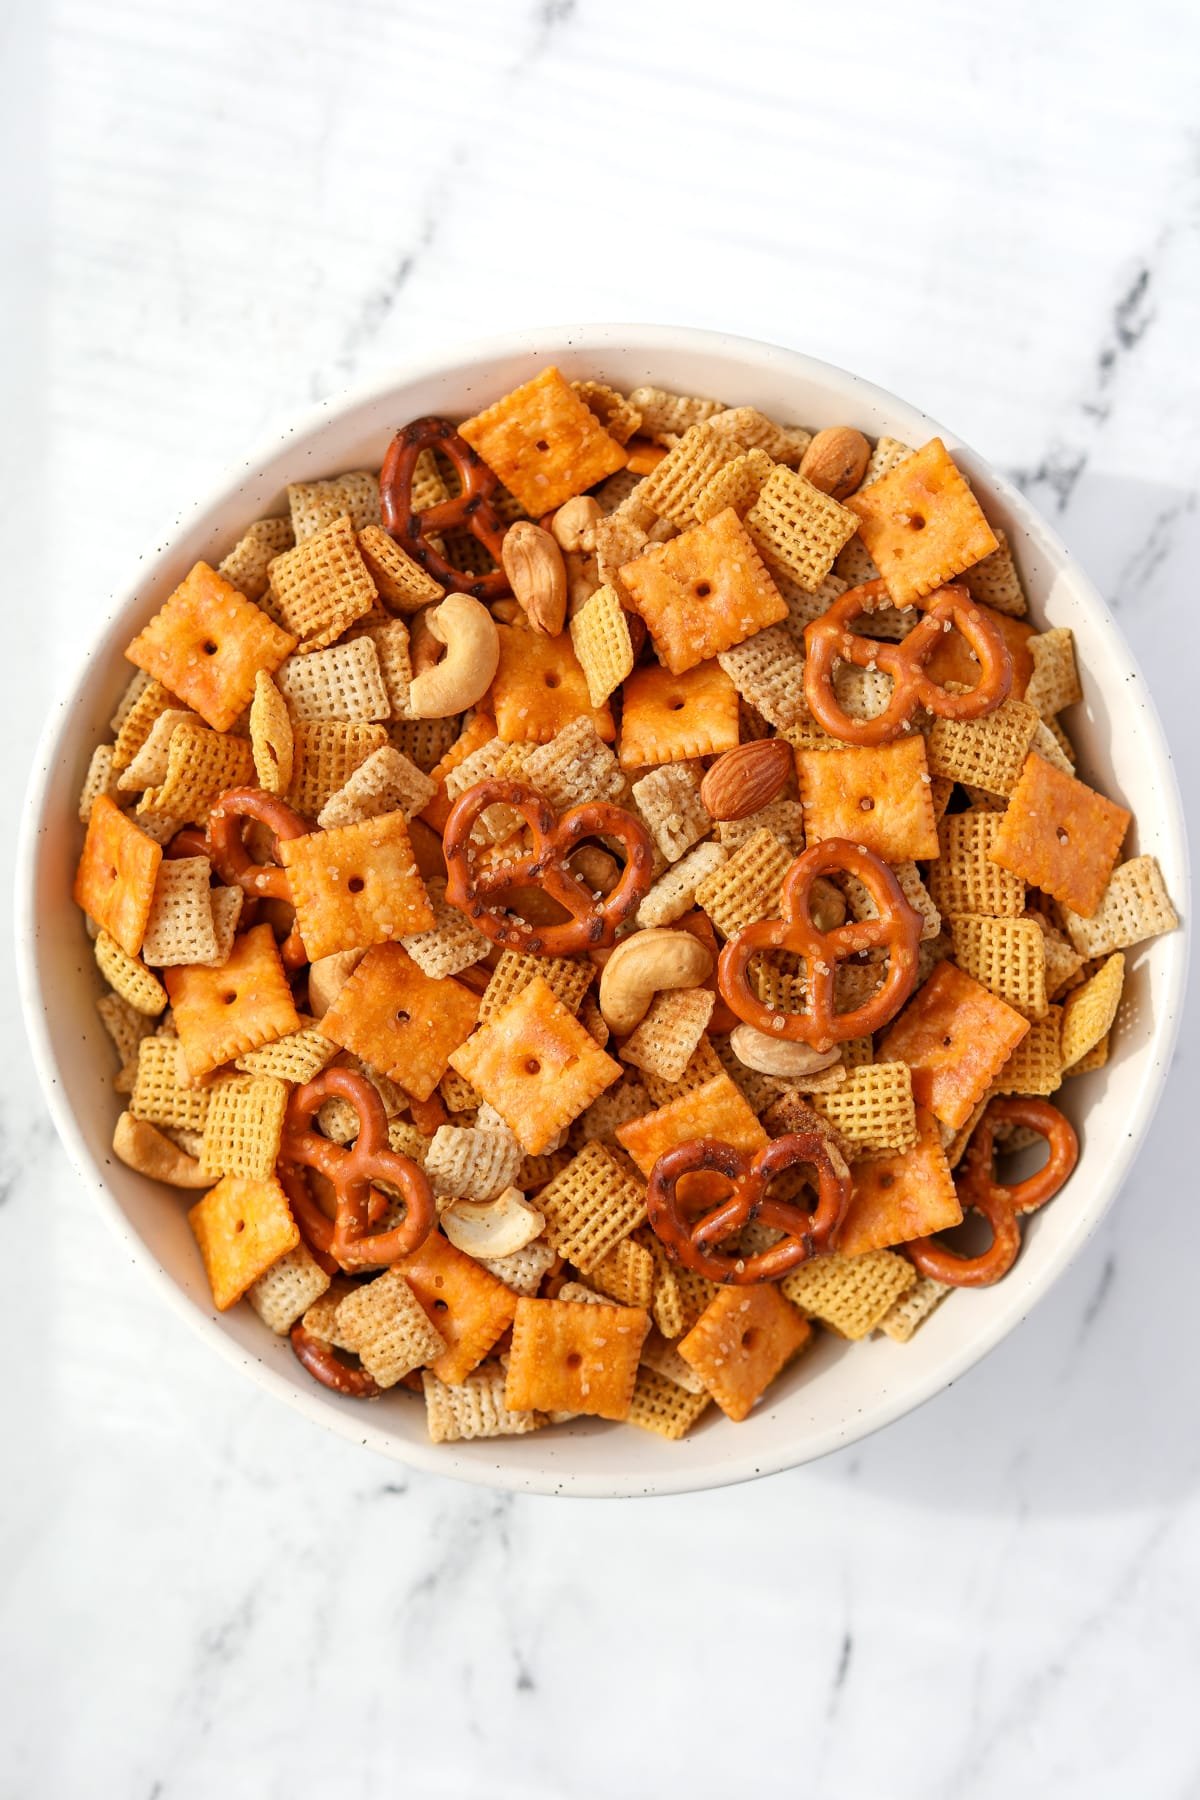 A bowl of Chex Mix on a white background.